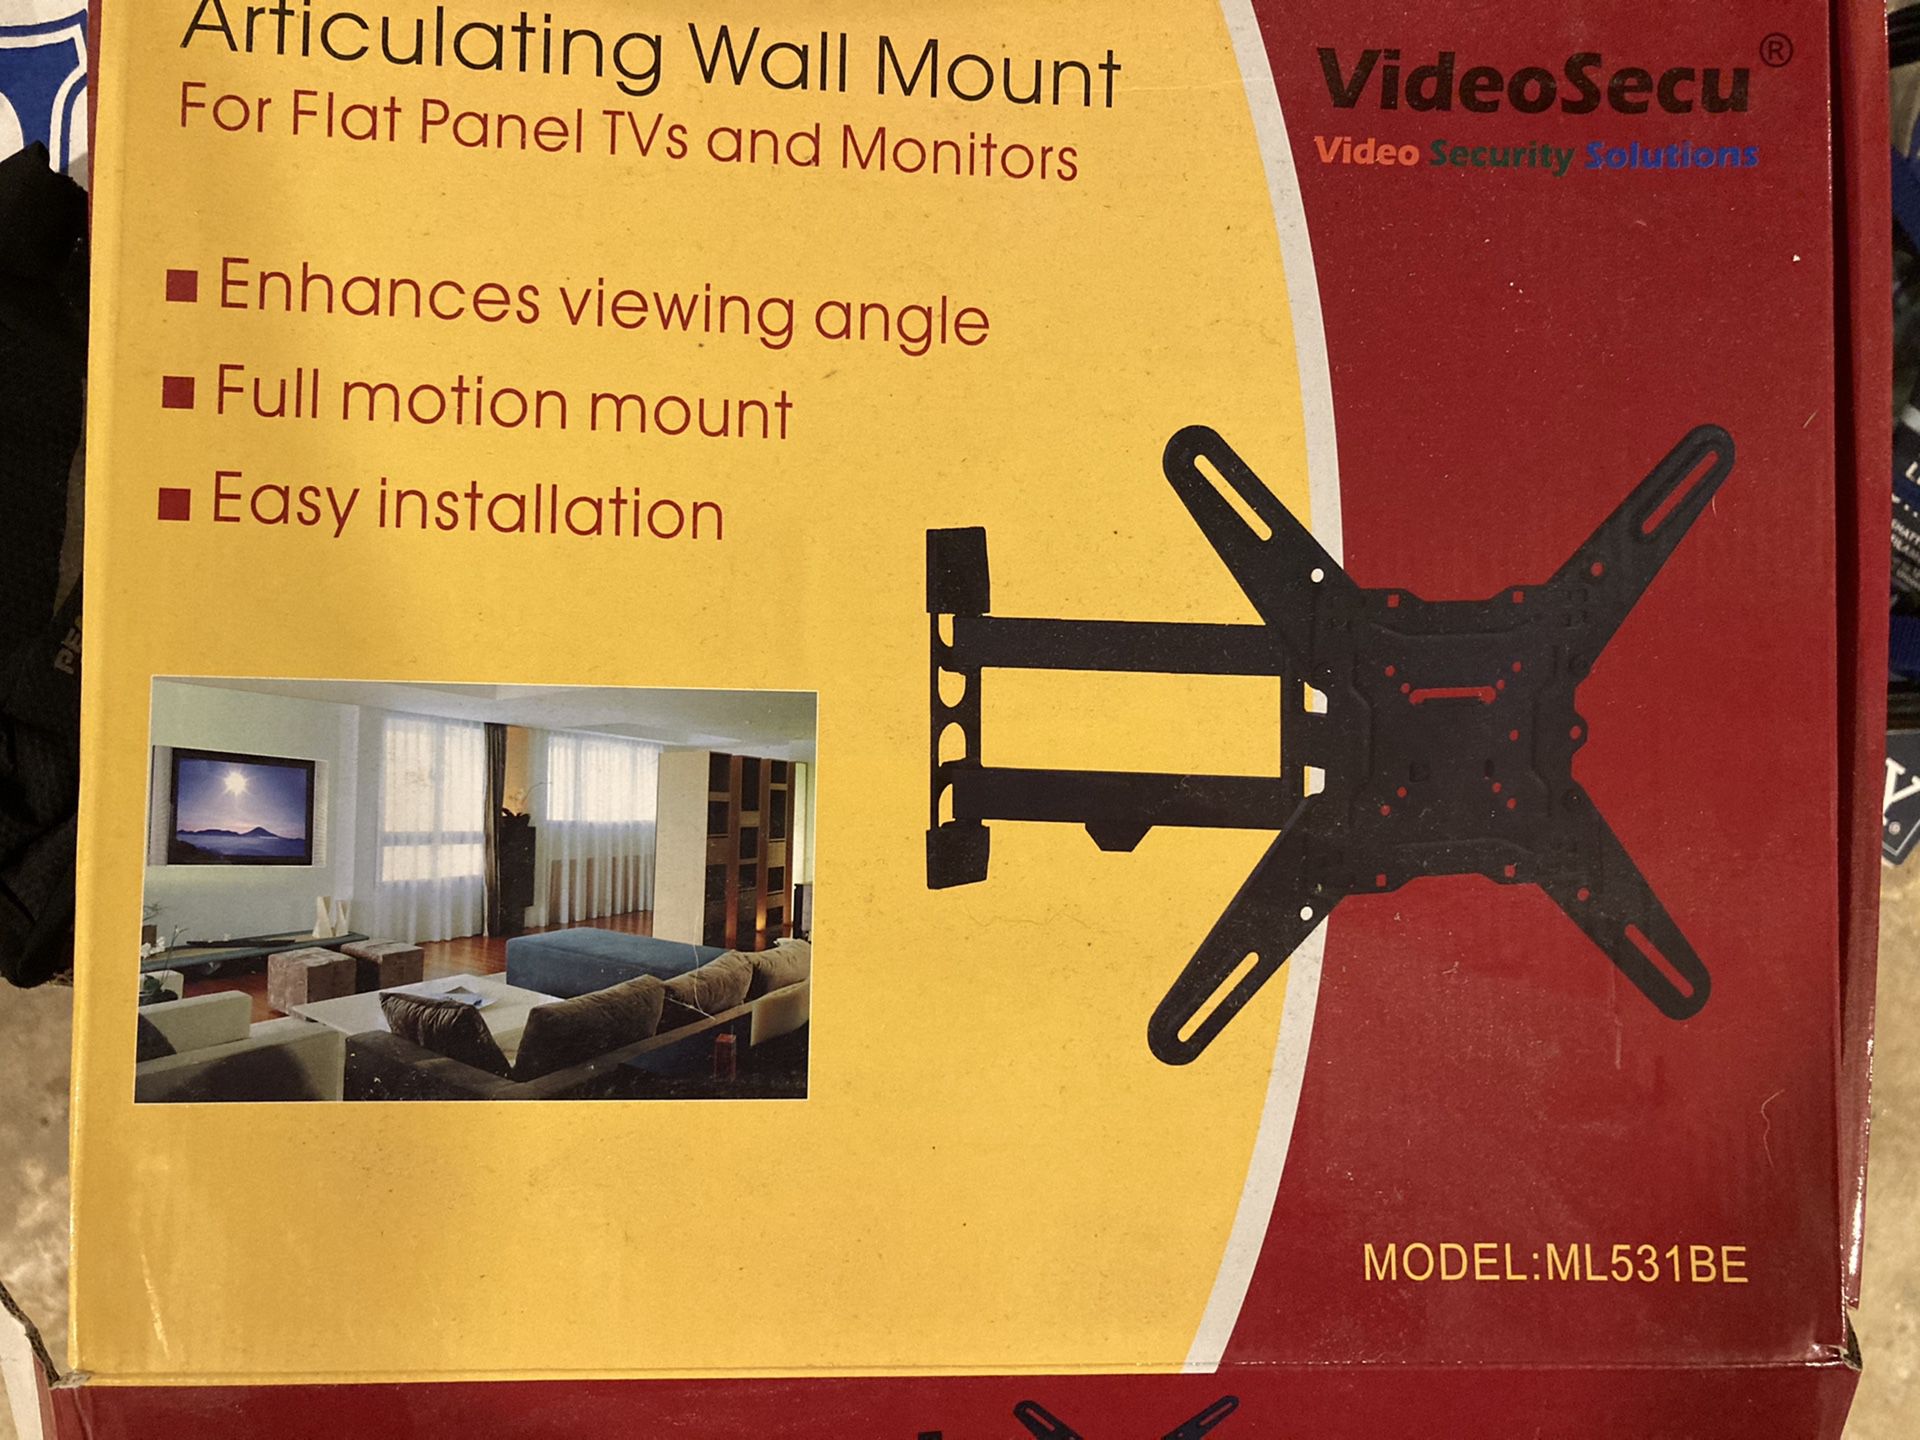 Articulating wall mount